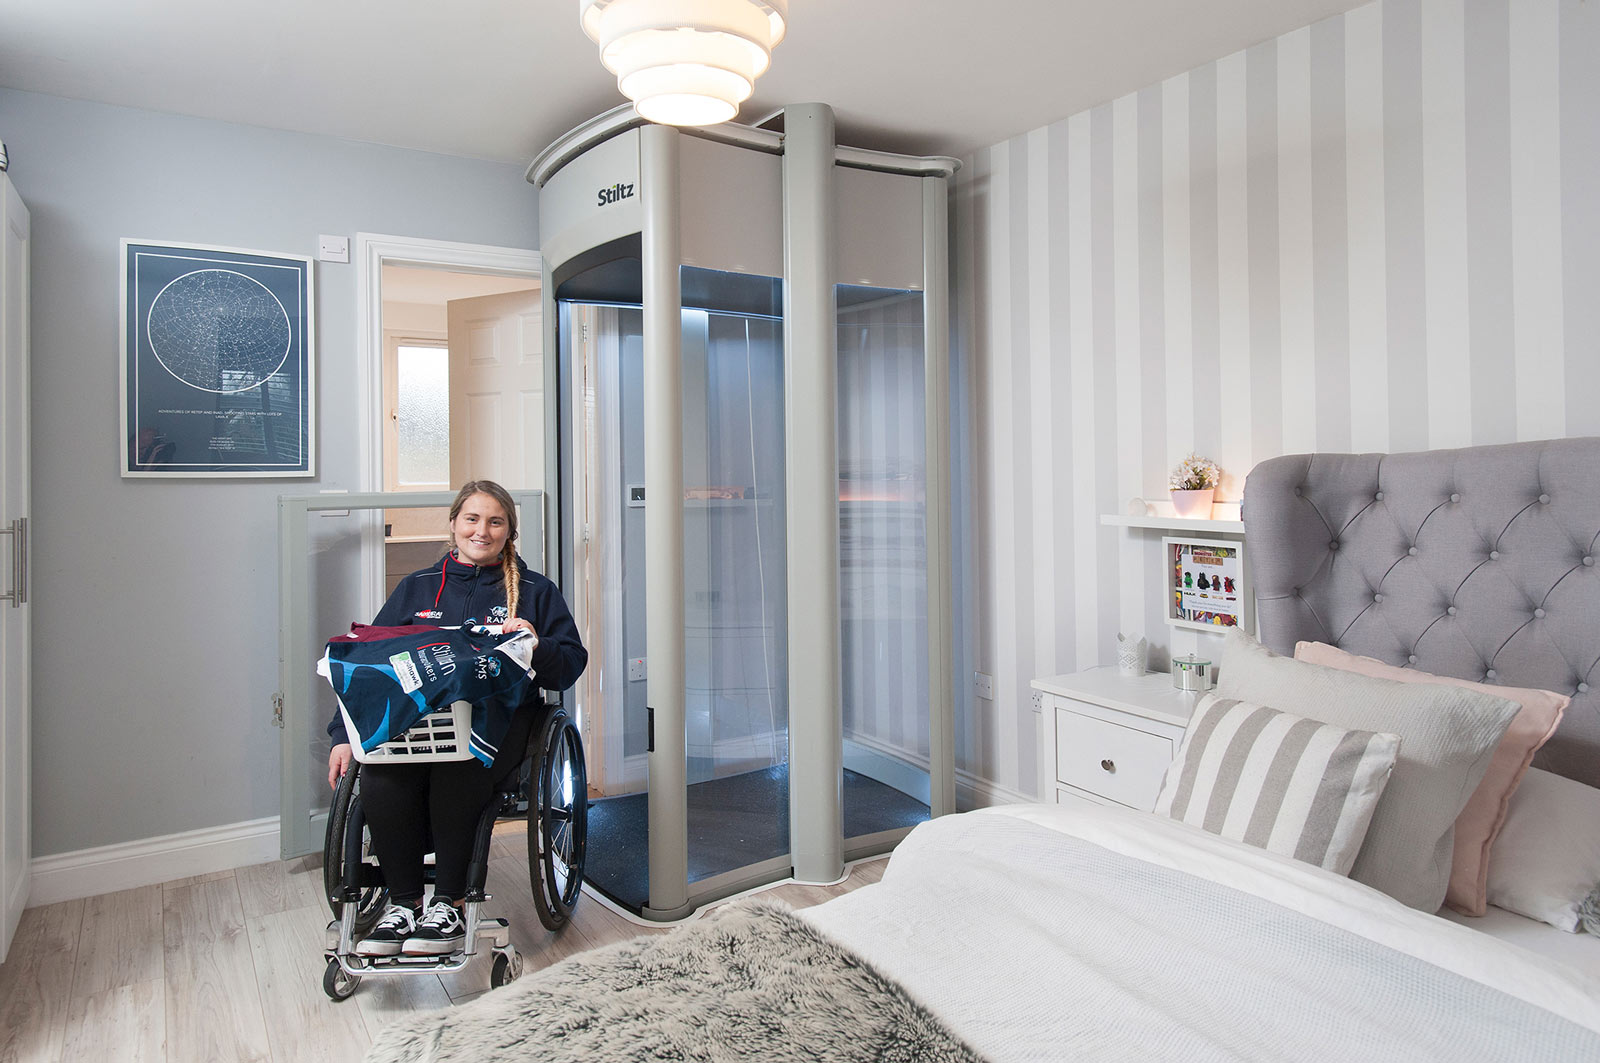 home elevator with glass walls, fits wheelchairs